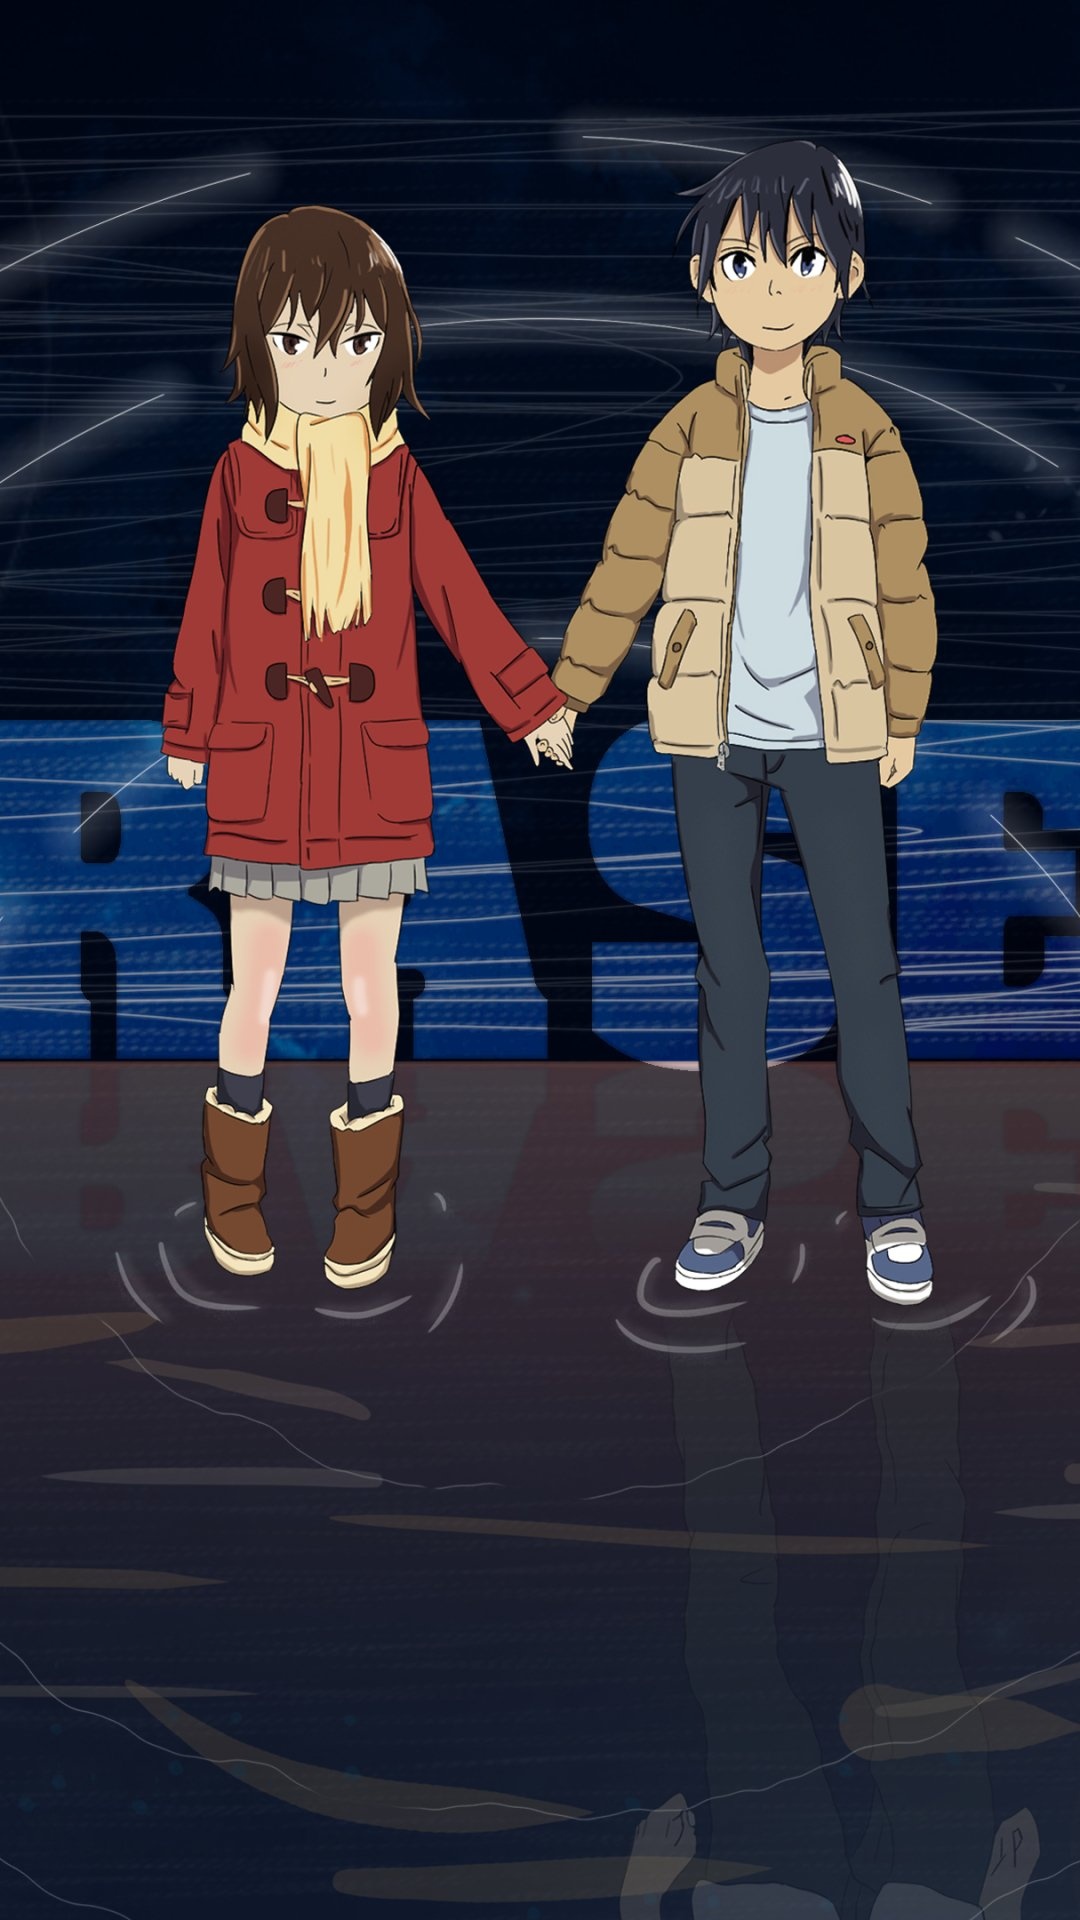 Anime Spotlight - ERASED - Anime News Network, anime erased characters -  thirstymag.com